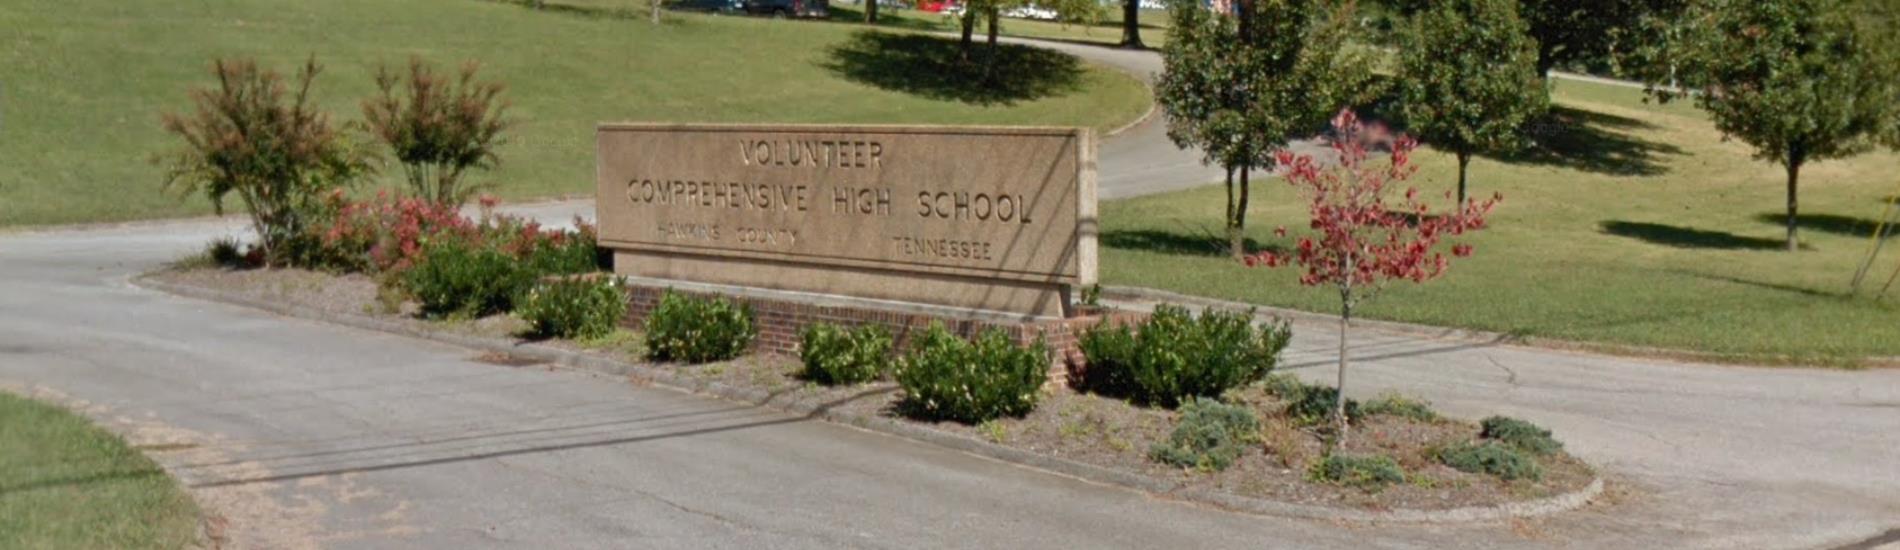 concrete sign for Volunteer High School in front of building